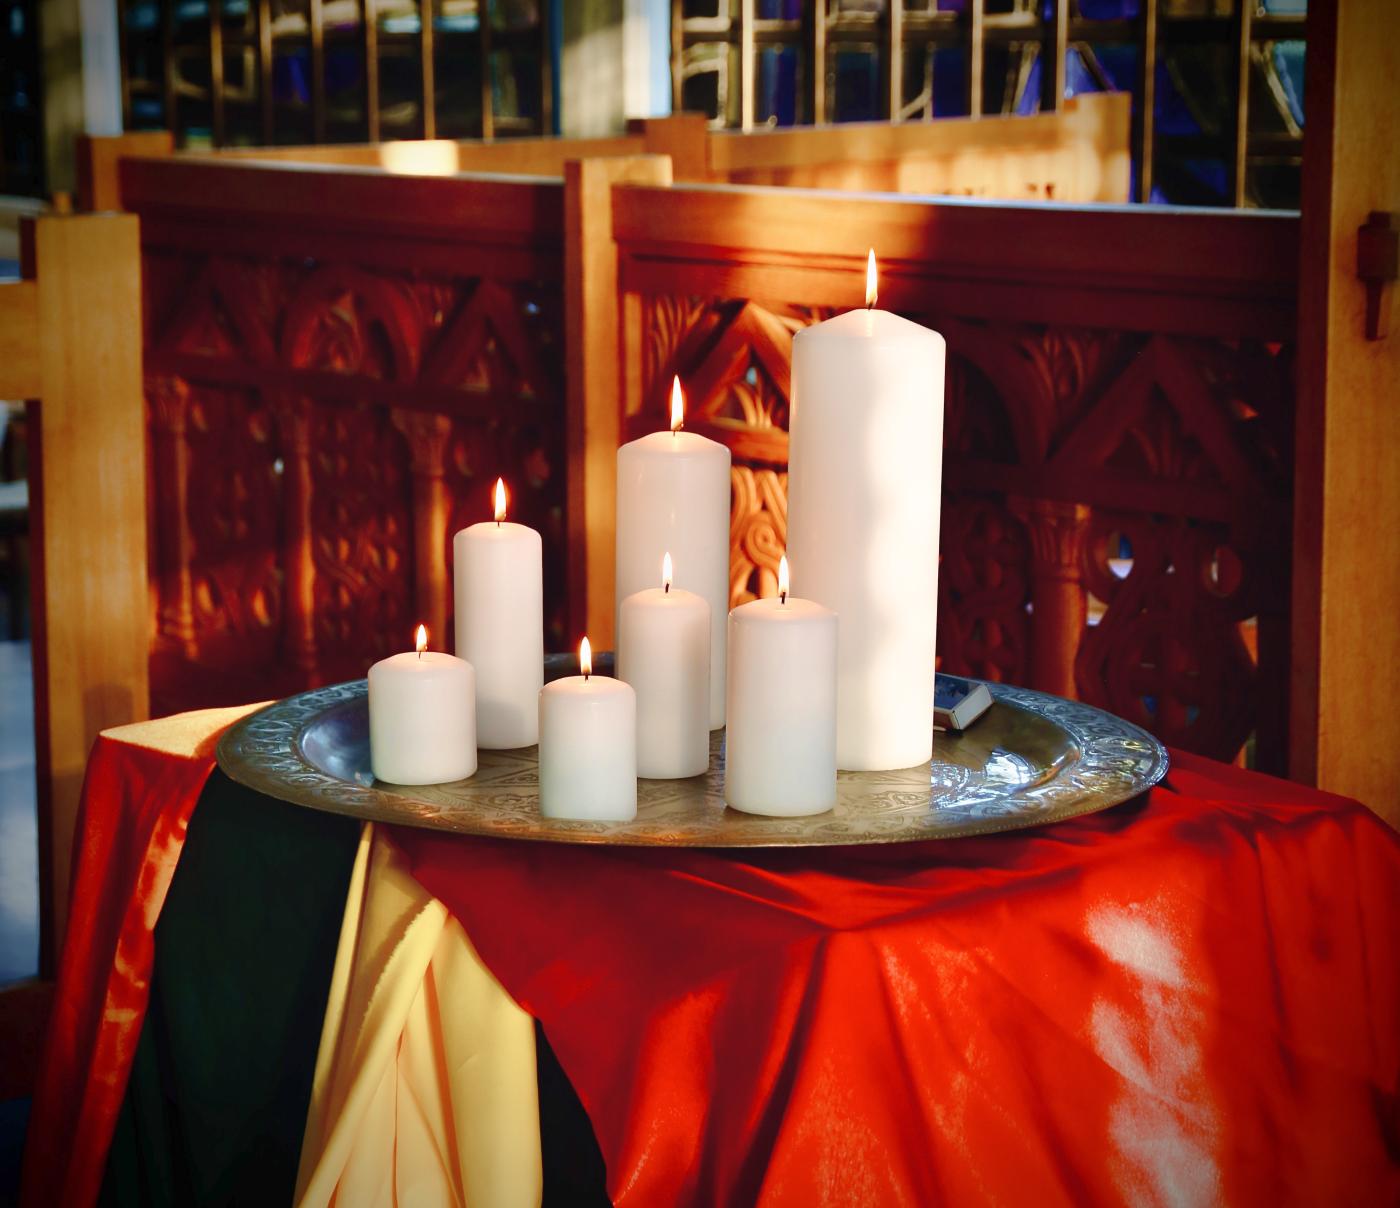 During the World day of prayer 7 Candles where lit as a symbol of Hope.